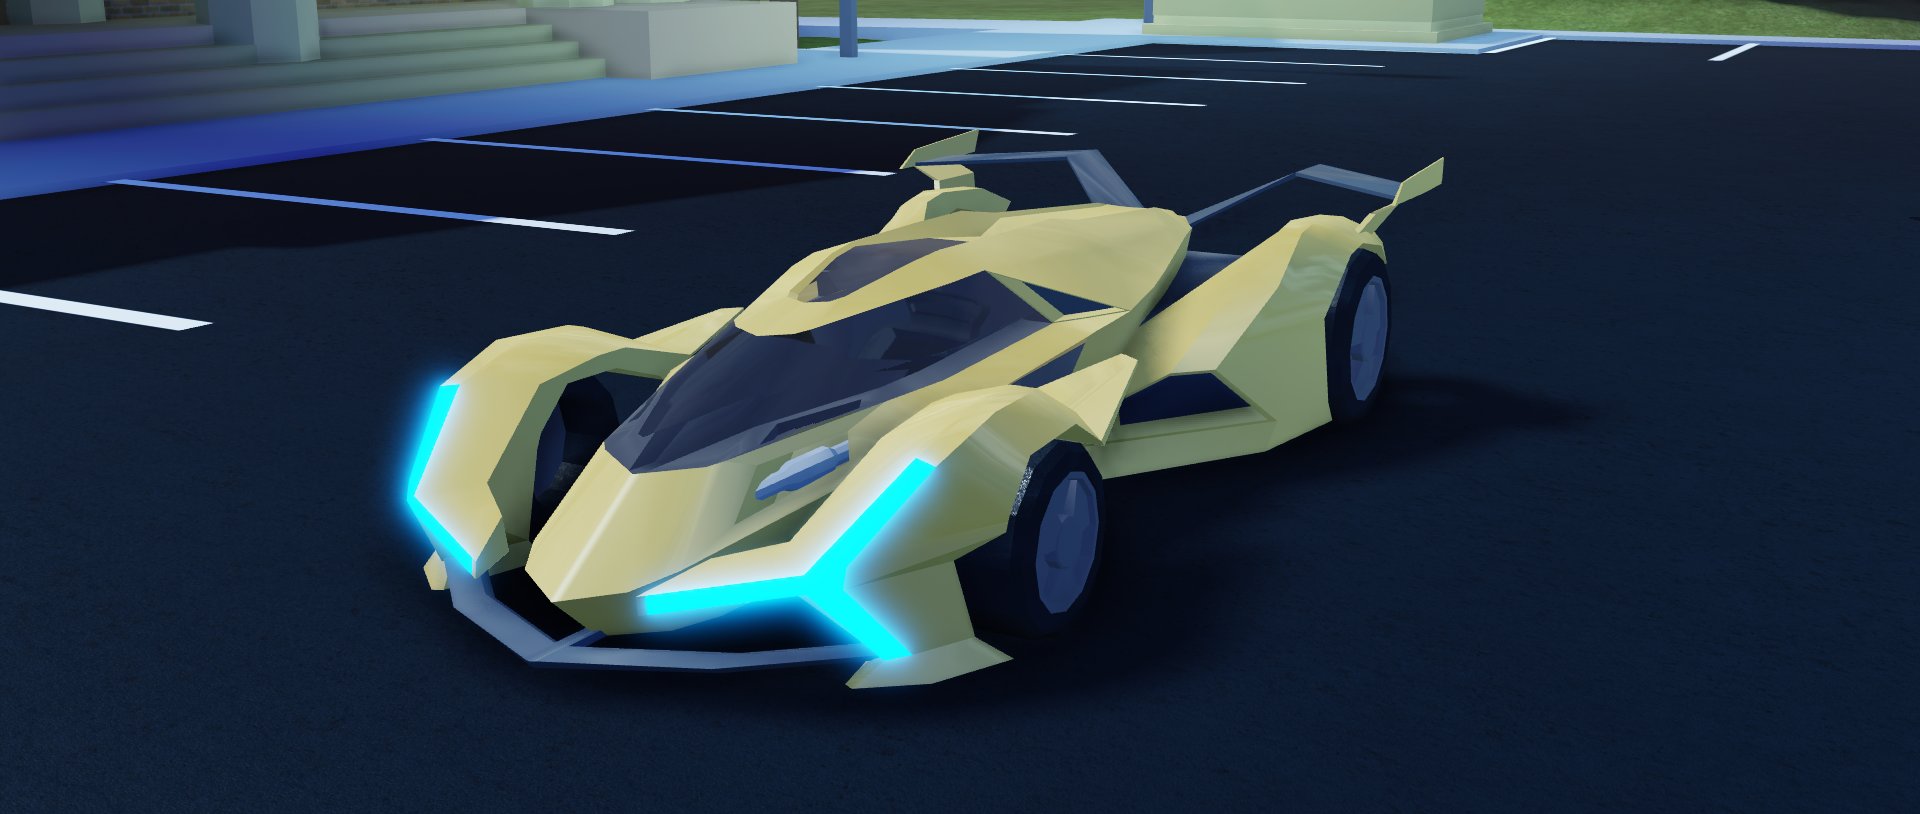 Rallysubbie On Twitter My Dream To Have A Personal Jailbreak Vehicle Made By Myself For Myself Roblox Robloxdev Robloxjailbreak - lambo roblox jailbreak